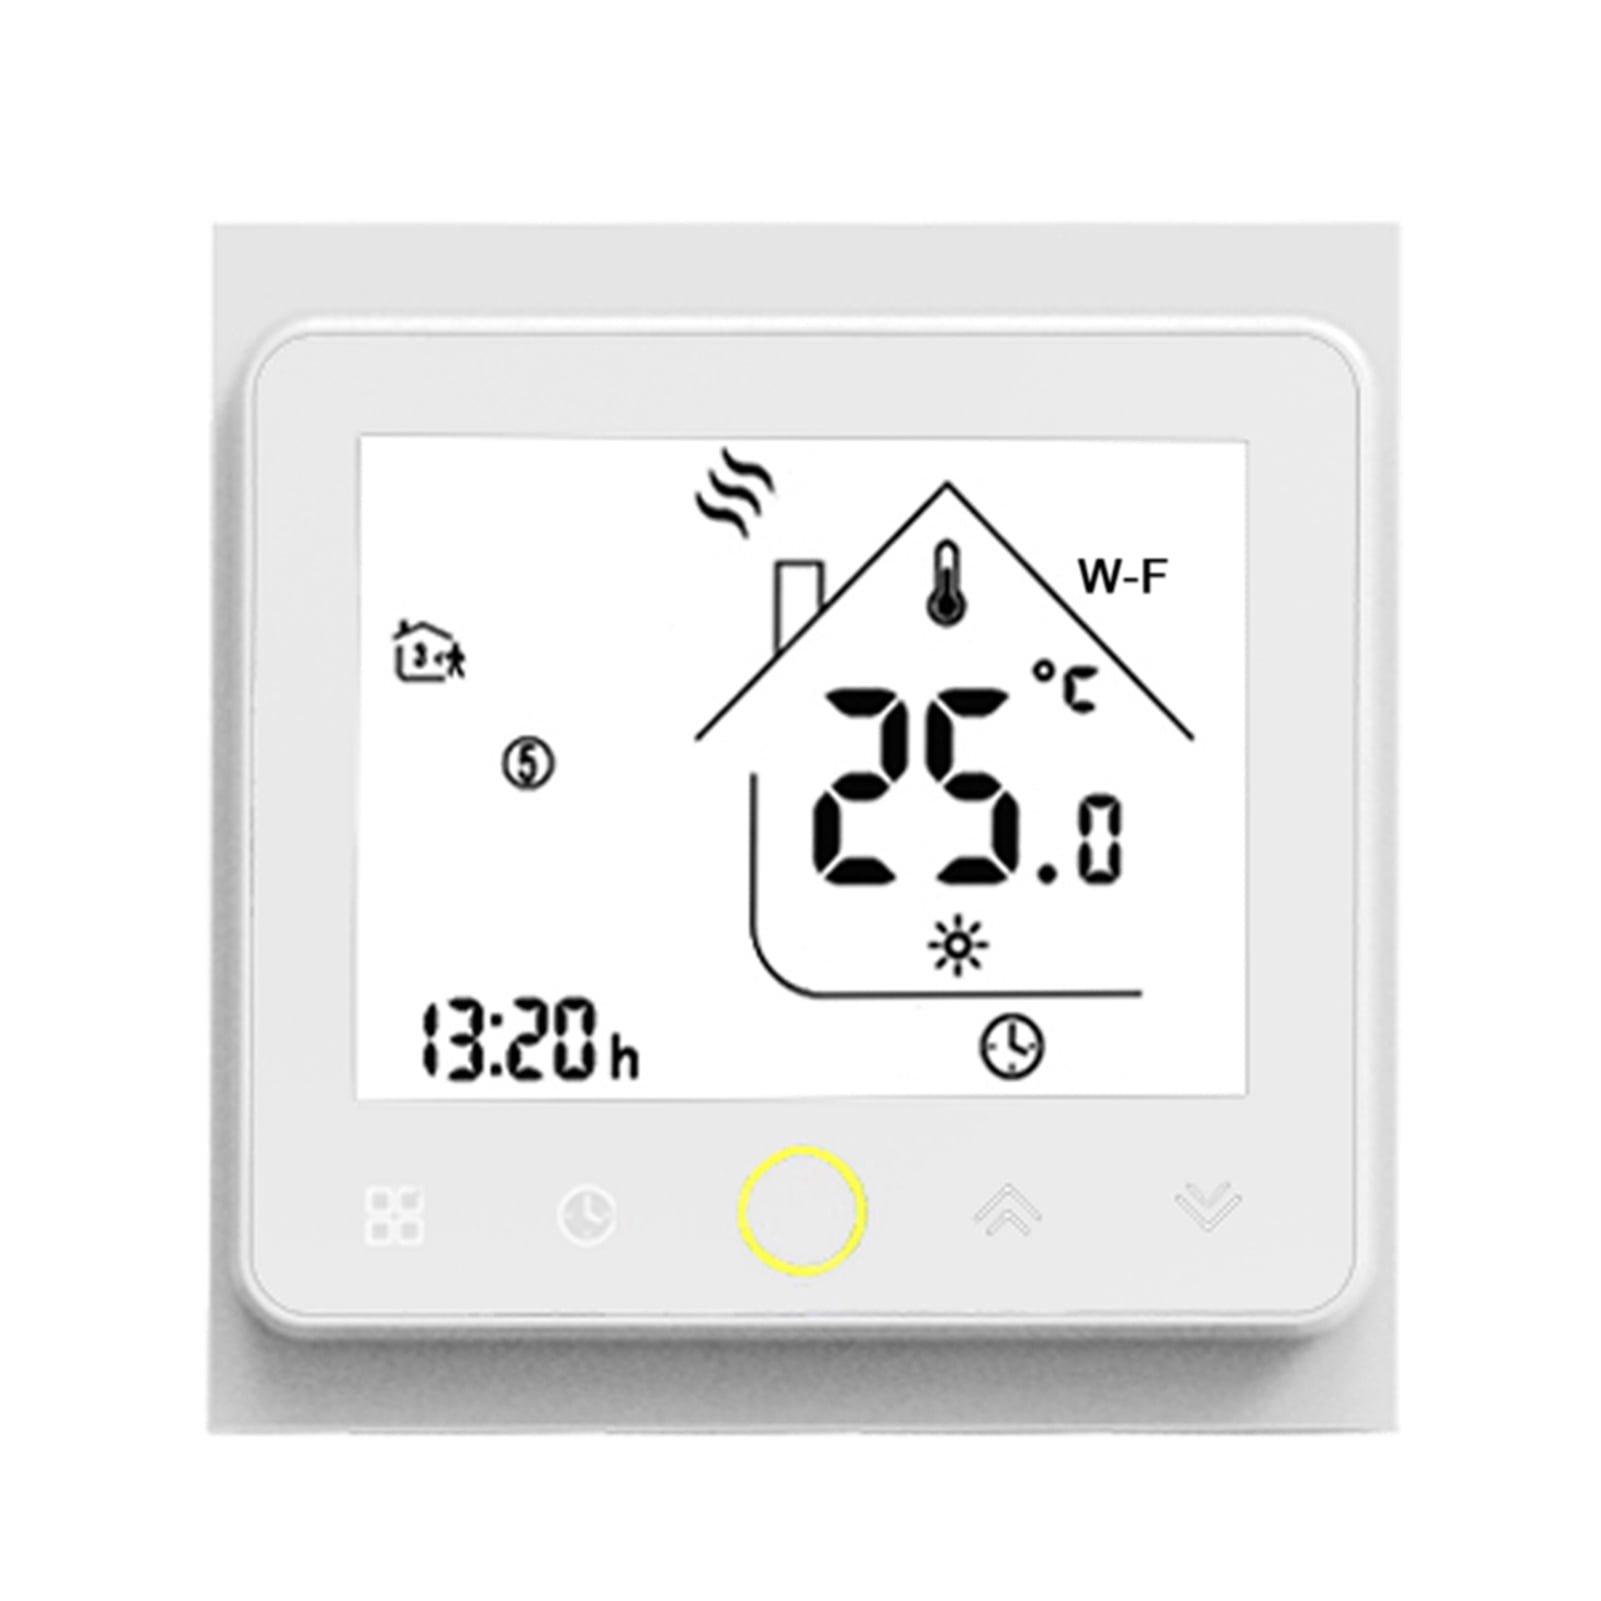 Aibecy Tuya Zigbee3.0 Smart Thermostat 5A Weekly Programmable Temperature Controller App Control Voice Control Compatible with / Home for Water Floor